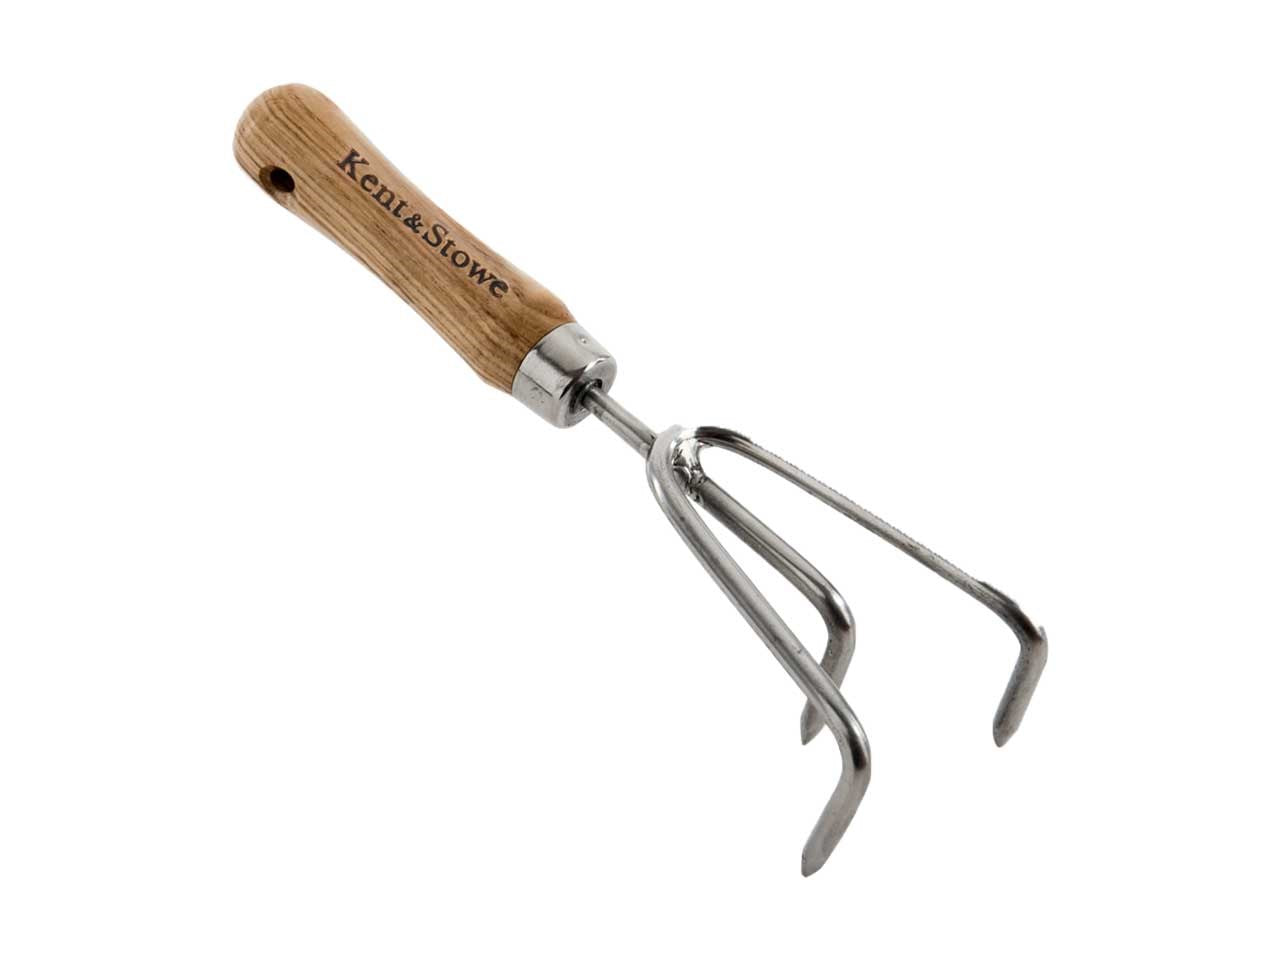 Kent & Stowe 3 Prong Hand Cultivator Stainless Steel Garden Life